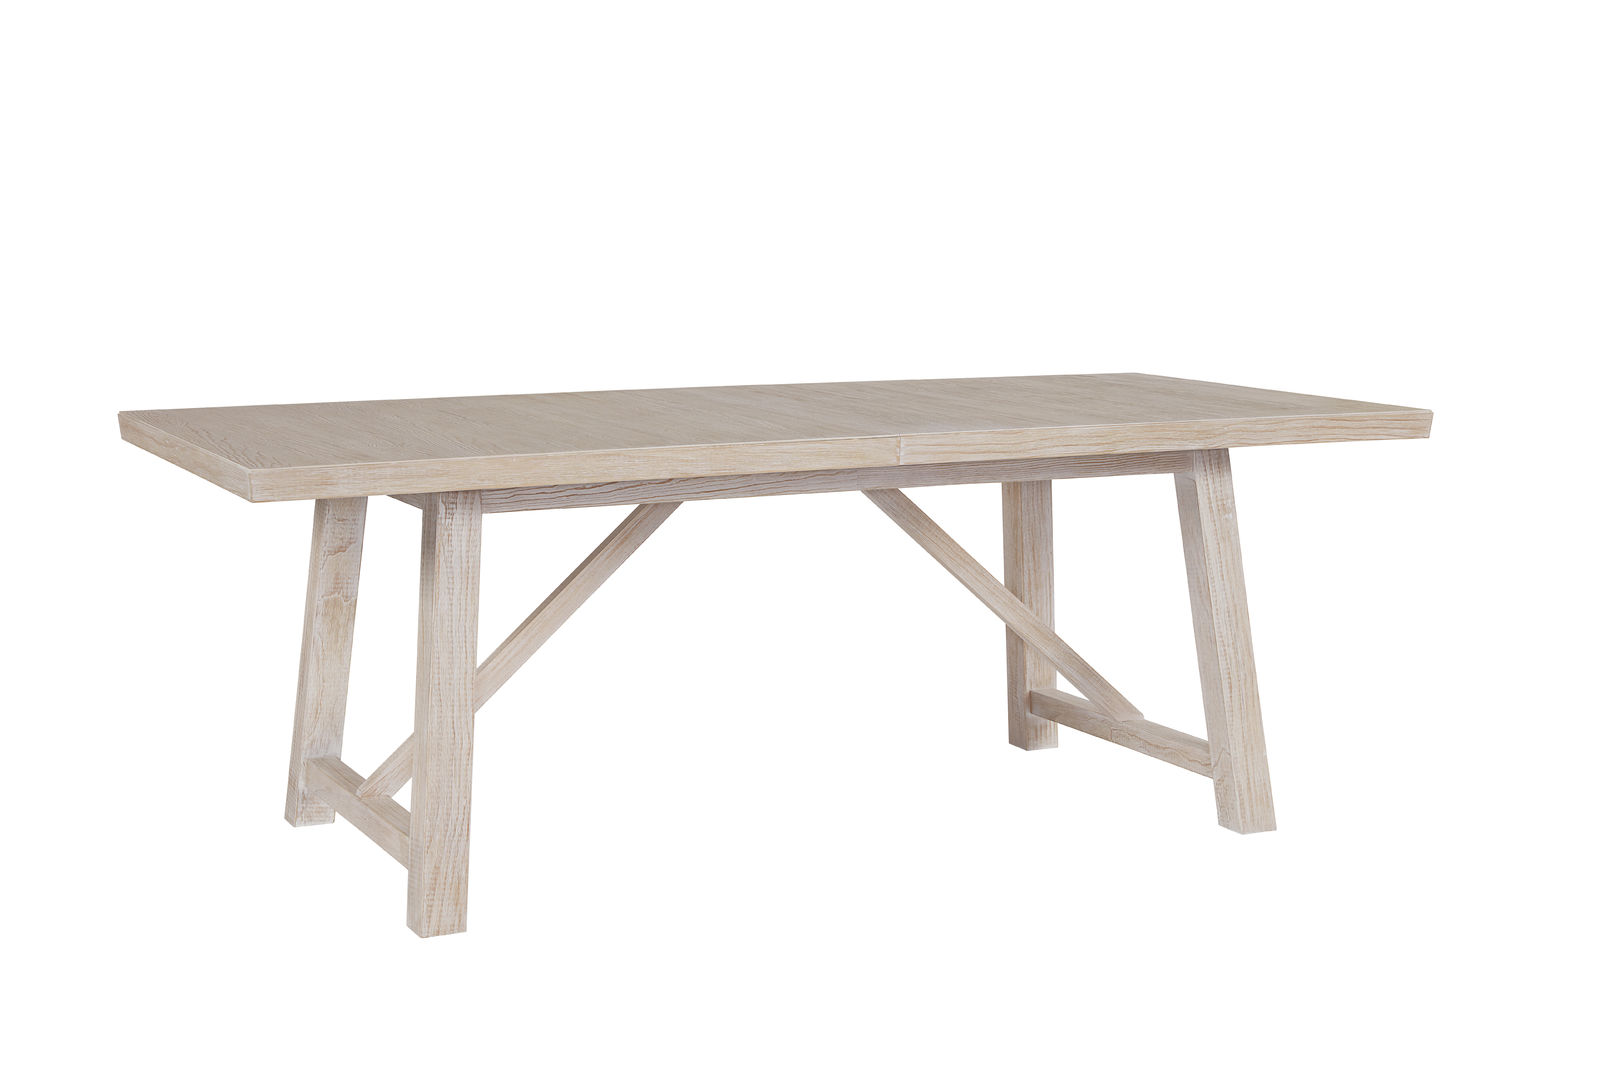 The Getaway Bohemian Dining Table is a light, smooth, neutral wood statement piece for your dining room home decor. Find it at Charleston furniture stores by GDC Home